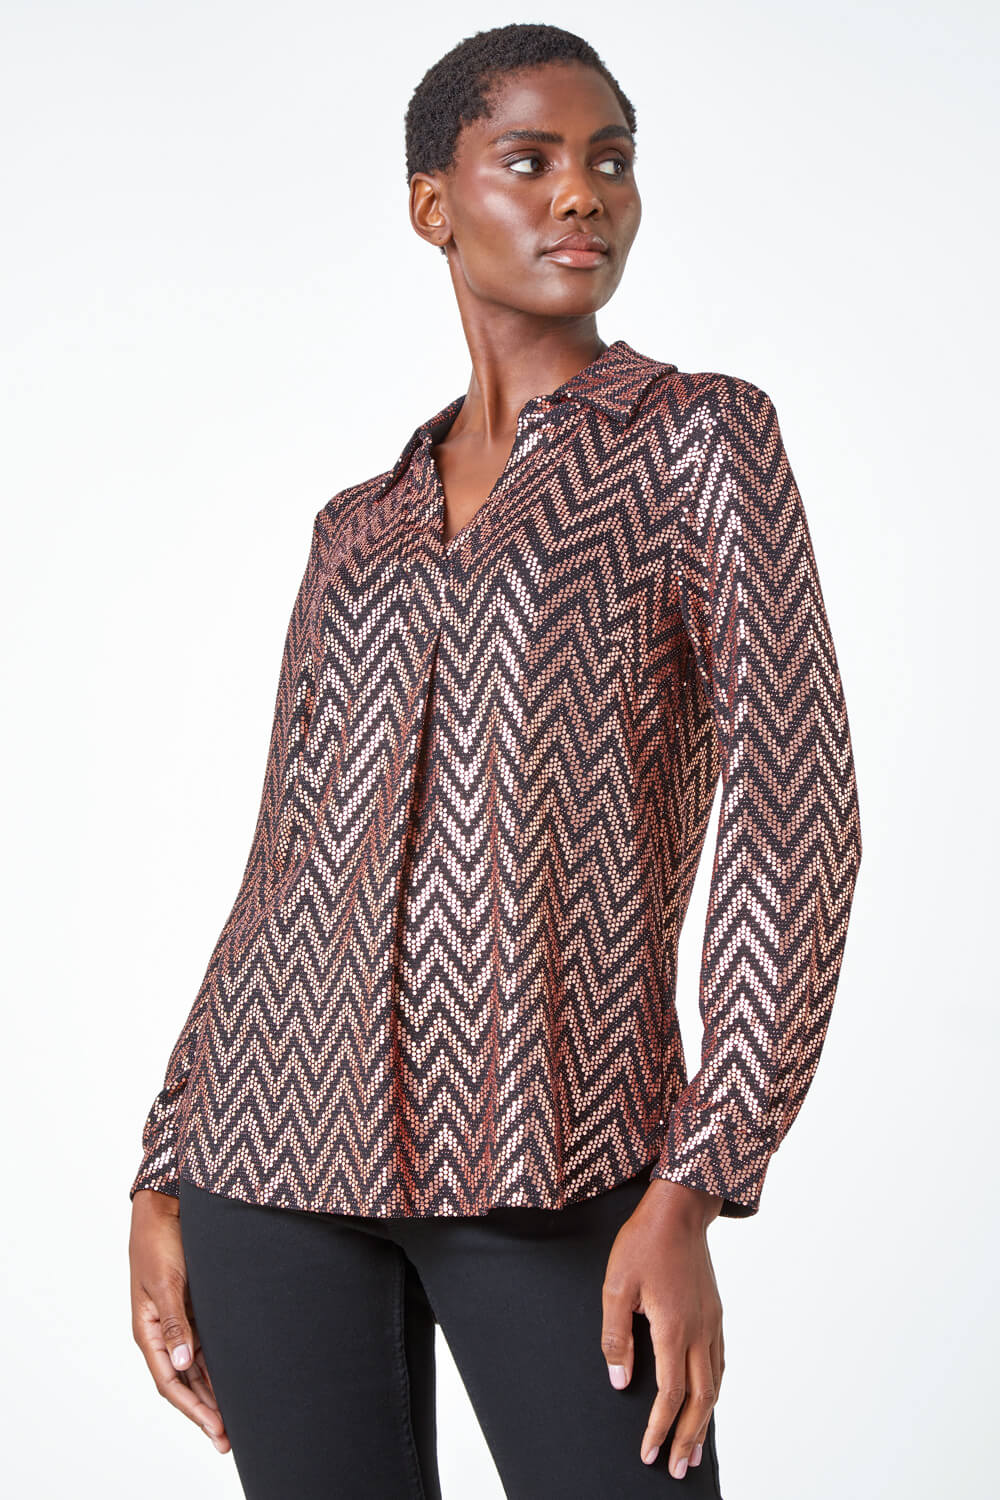 Gold Zig Zag Sequin Stretch Shirt, Image 1 of 5